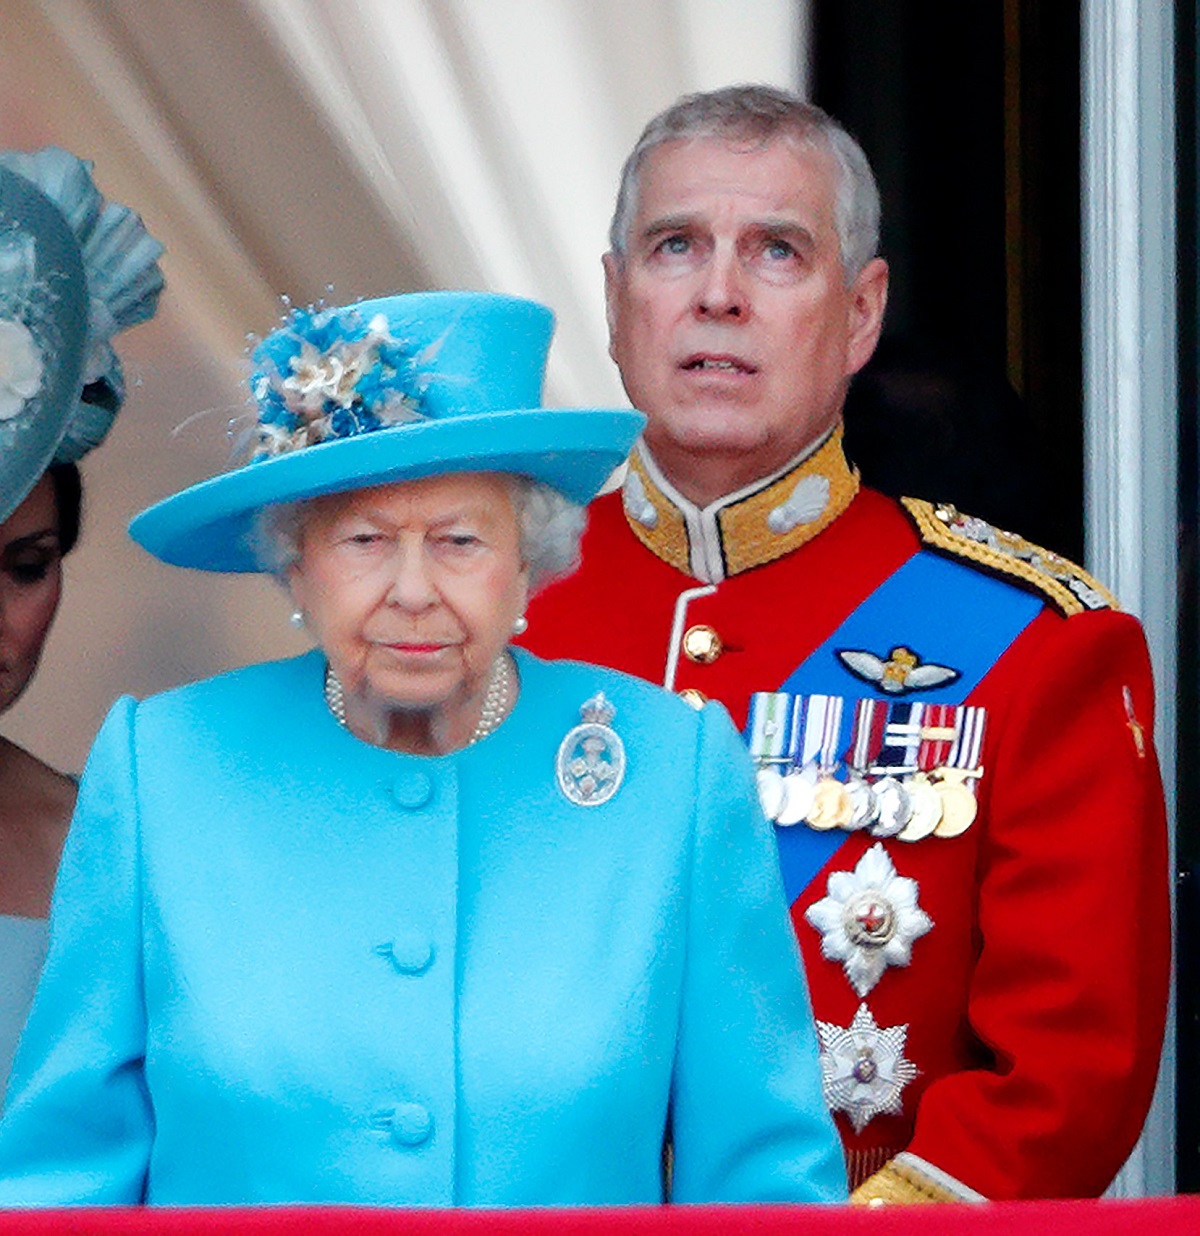 Prince Andrew standing behind Queen Elizabeth II at Trooping the Colour